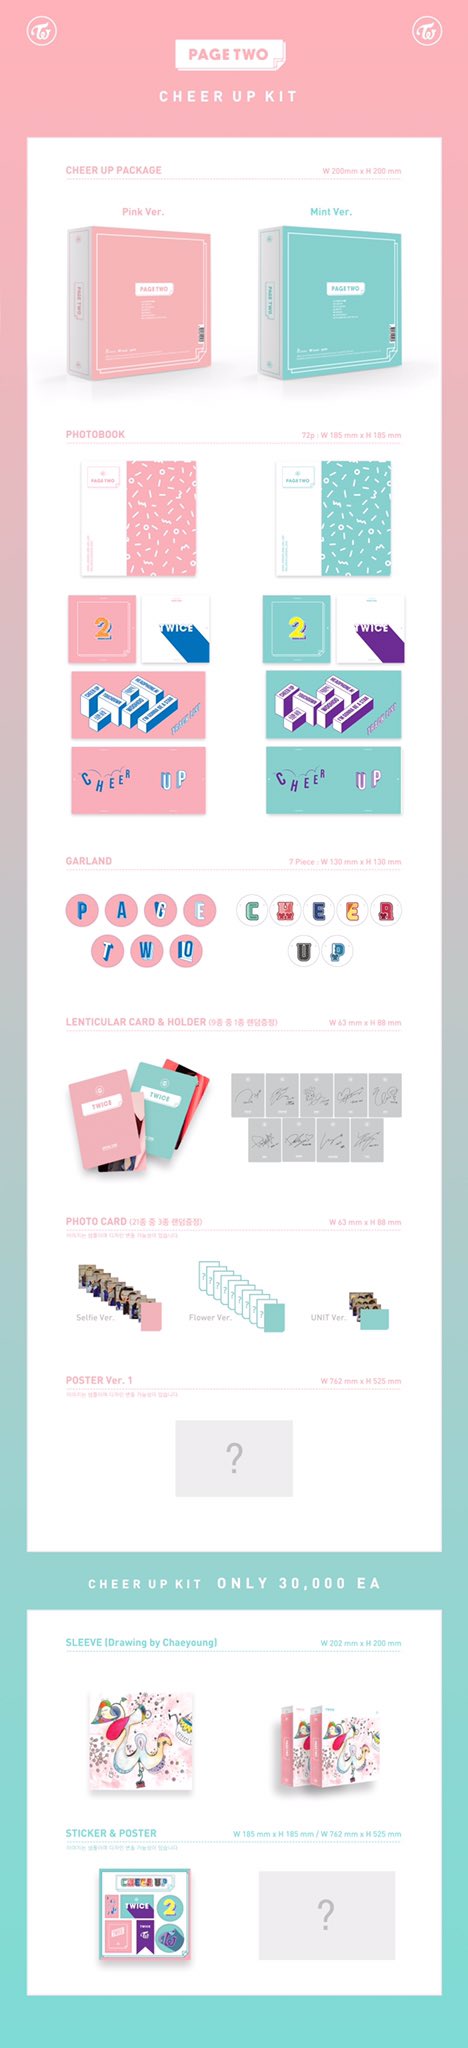 Jypnation Twice 2nd Mini Album Page Two Cheer Up Kit Pink Mint Ver Special Unit T Co Jl7ypjtsir Twitter